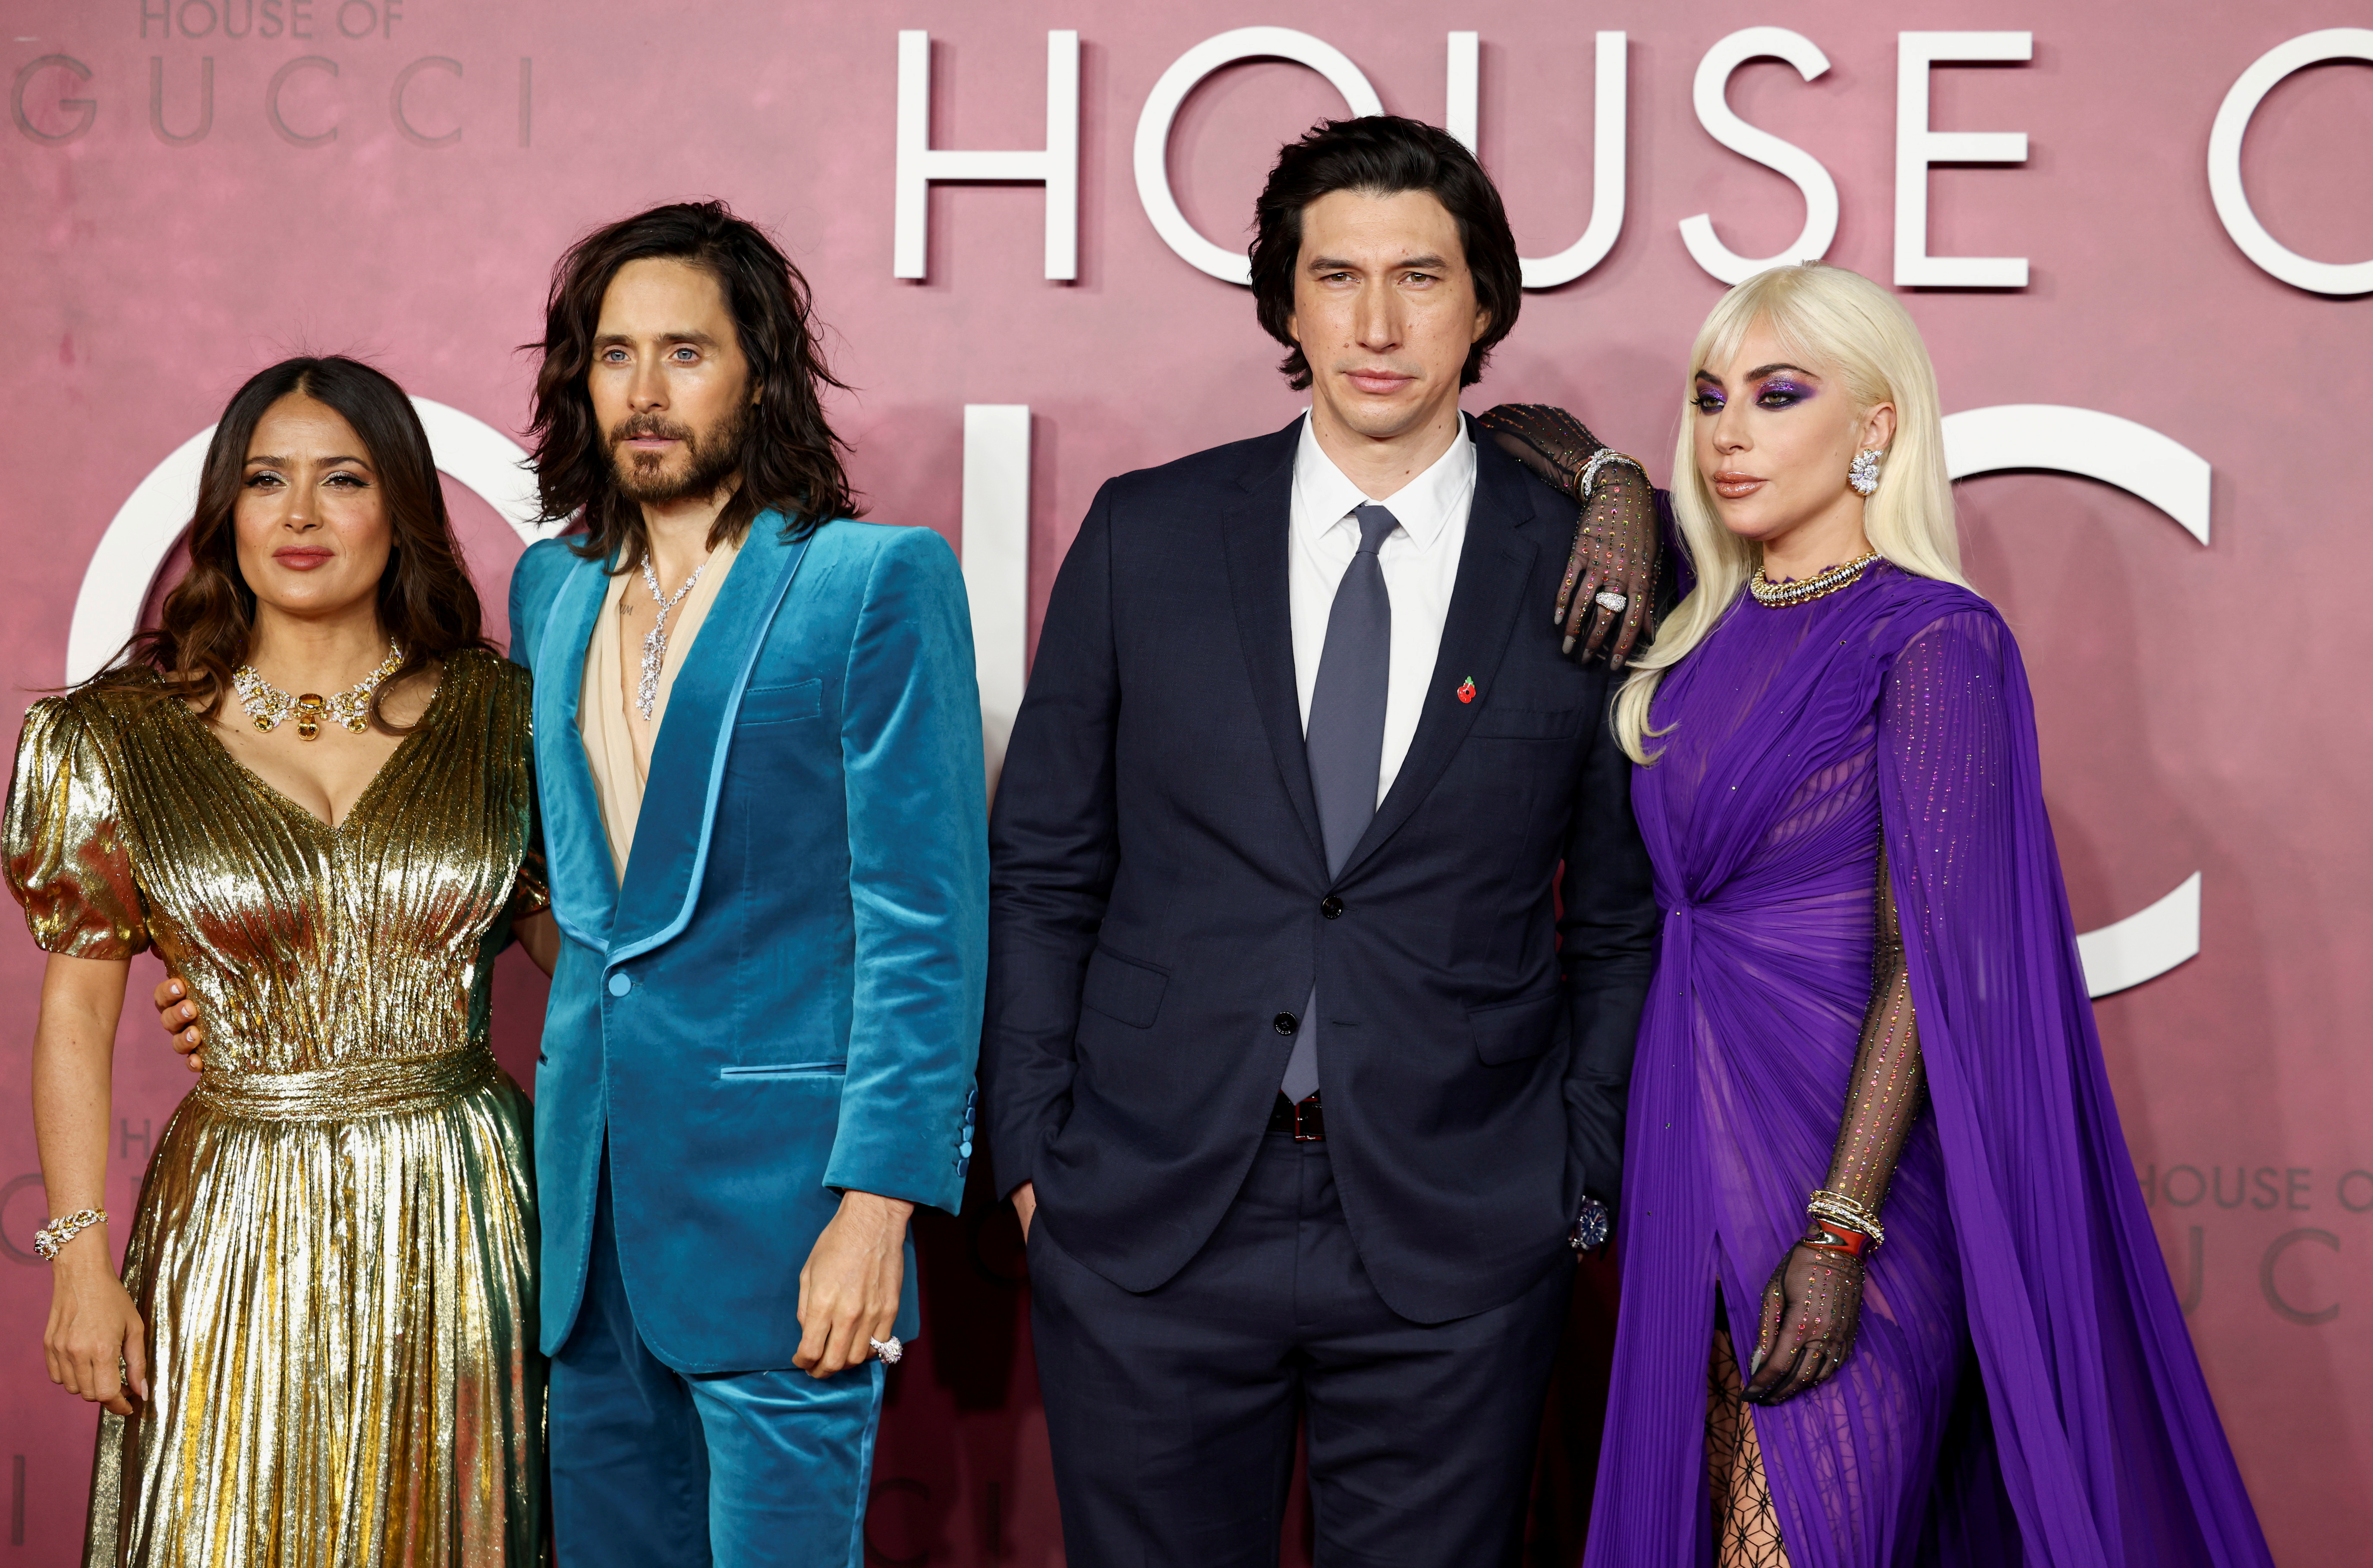 Cast members Salma Hayek, Jared Leto, Adam Driver, and Lady Gaga arrive at the UK Premiere of the film 'House of Gucci' at Leicester Square in London, Britain, November 9, 2021. REUTERS/Henry Nicholls